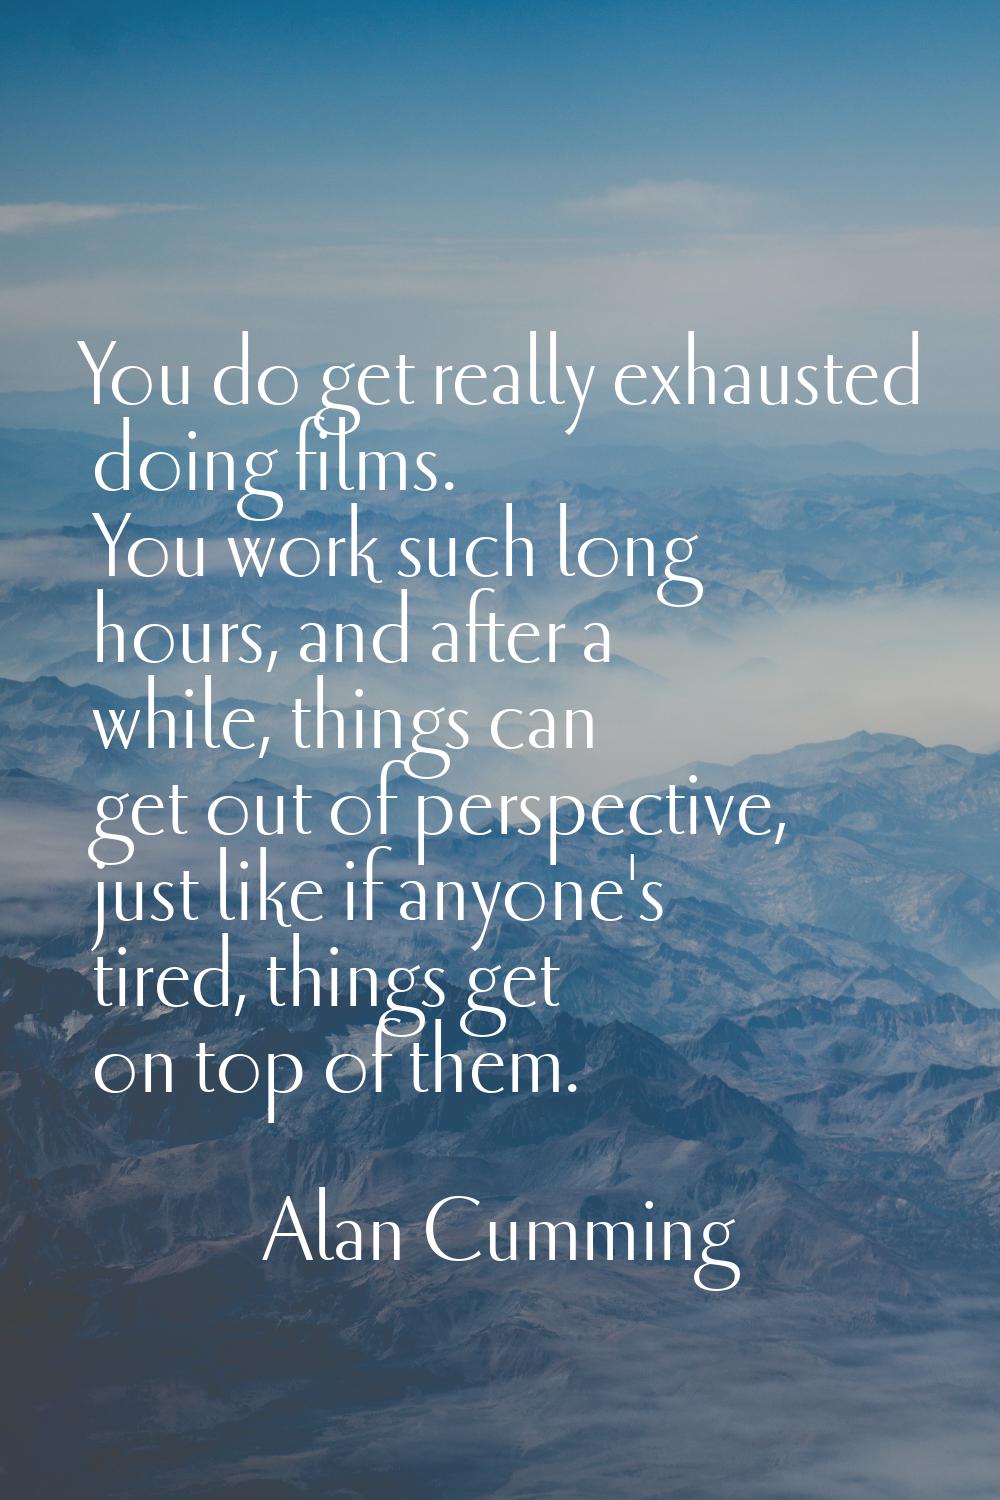 You do get really exhausted doing films. You work such long hours, and after a while, things can ge